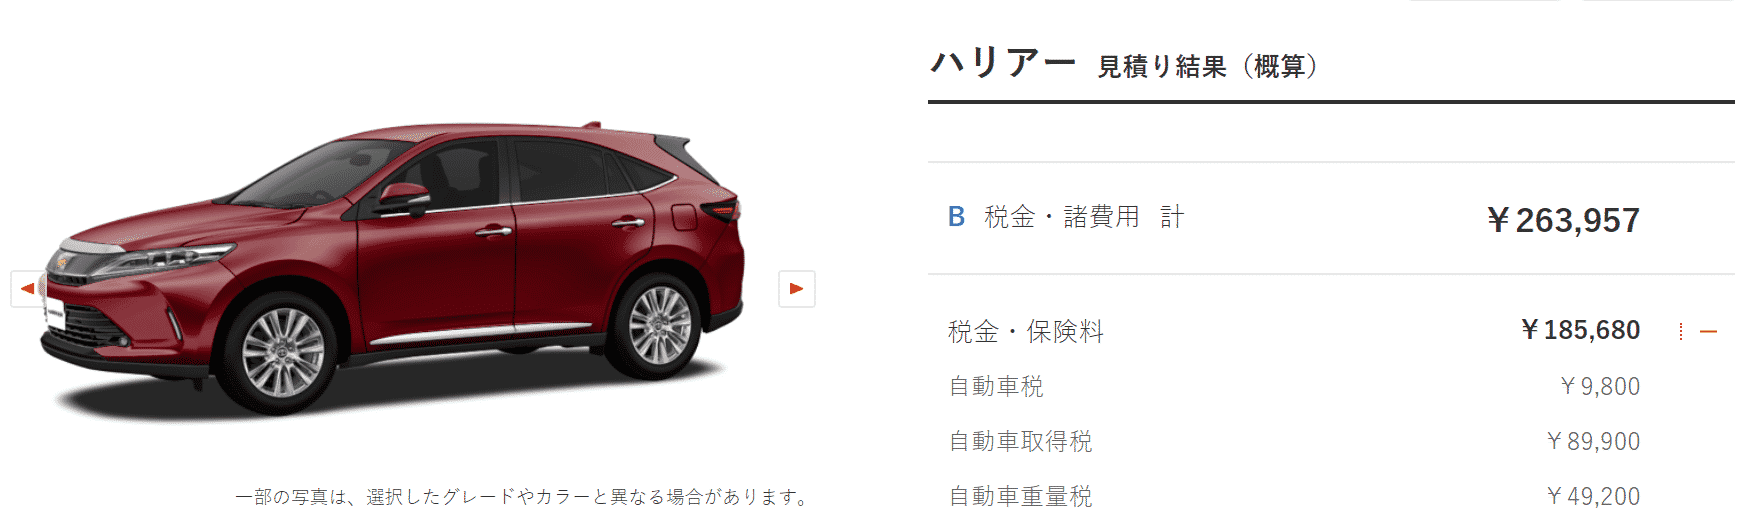 「PREMIUM “Metal and Leather Package”」ガソリン車の税額画像